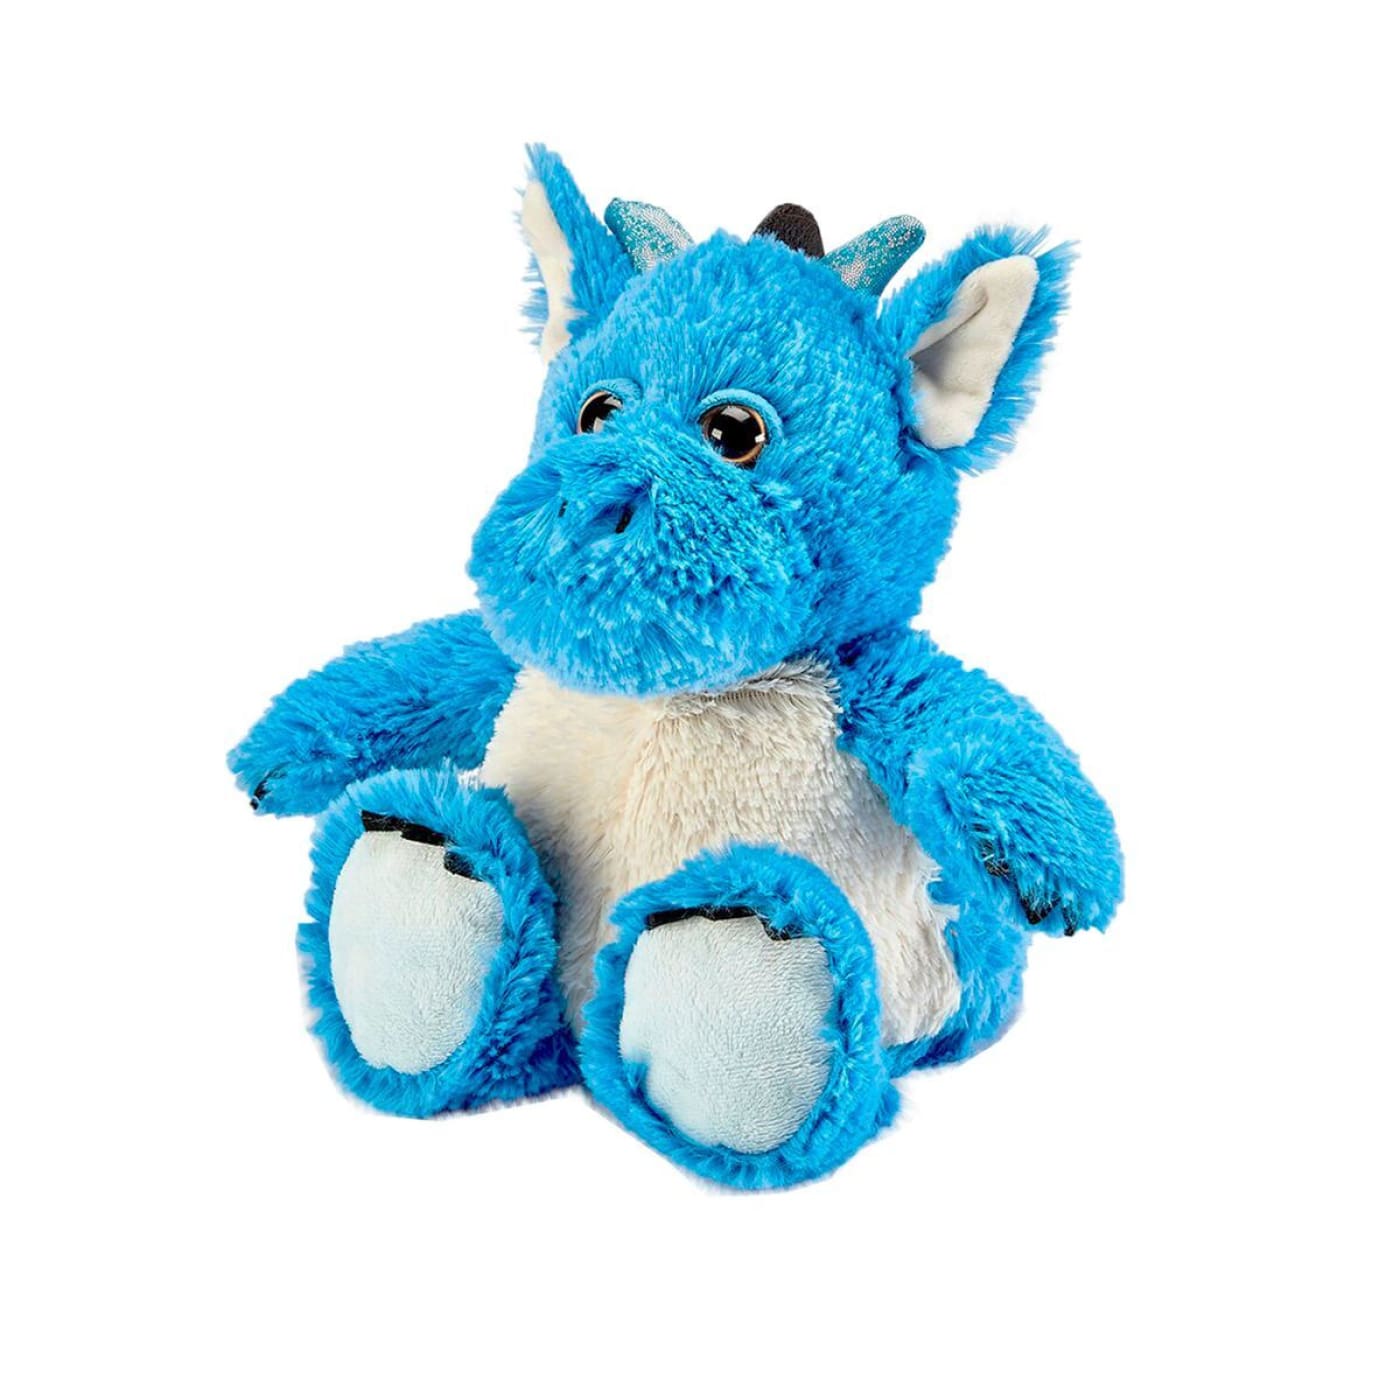 Warmies Cozy Plush - Blue Dragon - Dragon - HEALTH & HOME SAFETY - THERMOMETERS/MEDICINAL